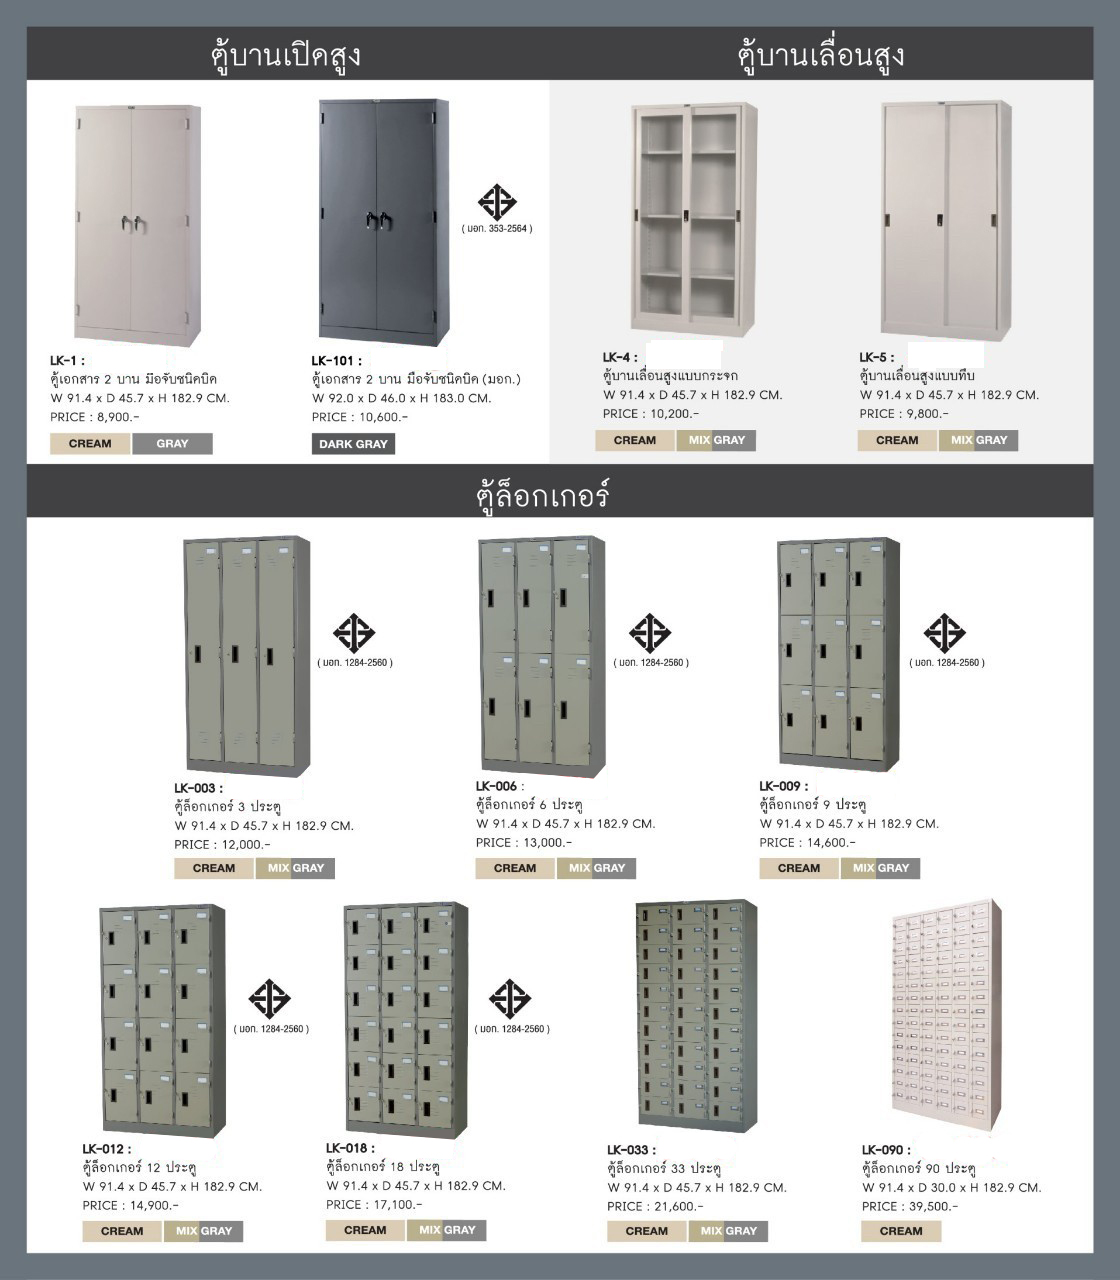 75069::LK-006::A Sure steel locker. Dimension (WxDxH) cm : 91.4x45.7x182.9. Available in Cream and Grey Metal Lockers